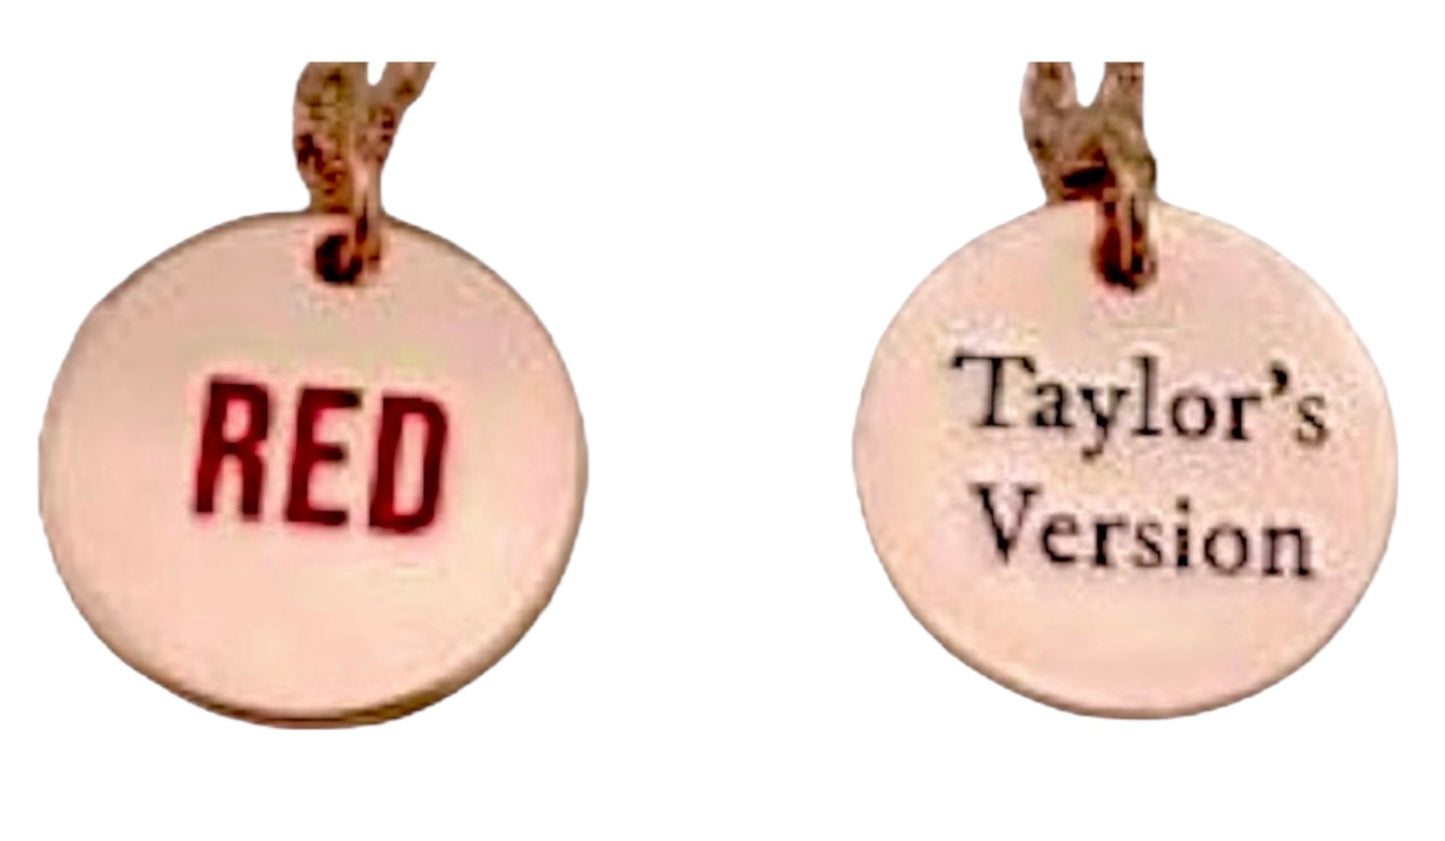 RED Taylor’s Version